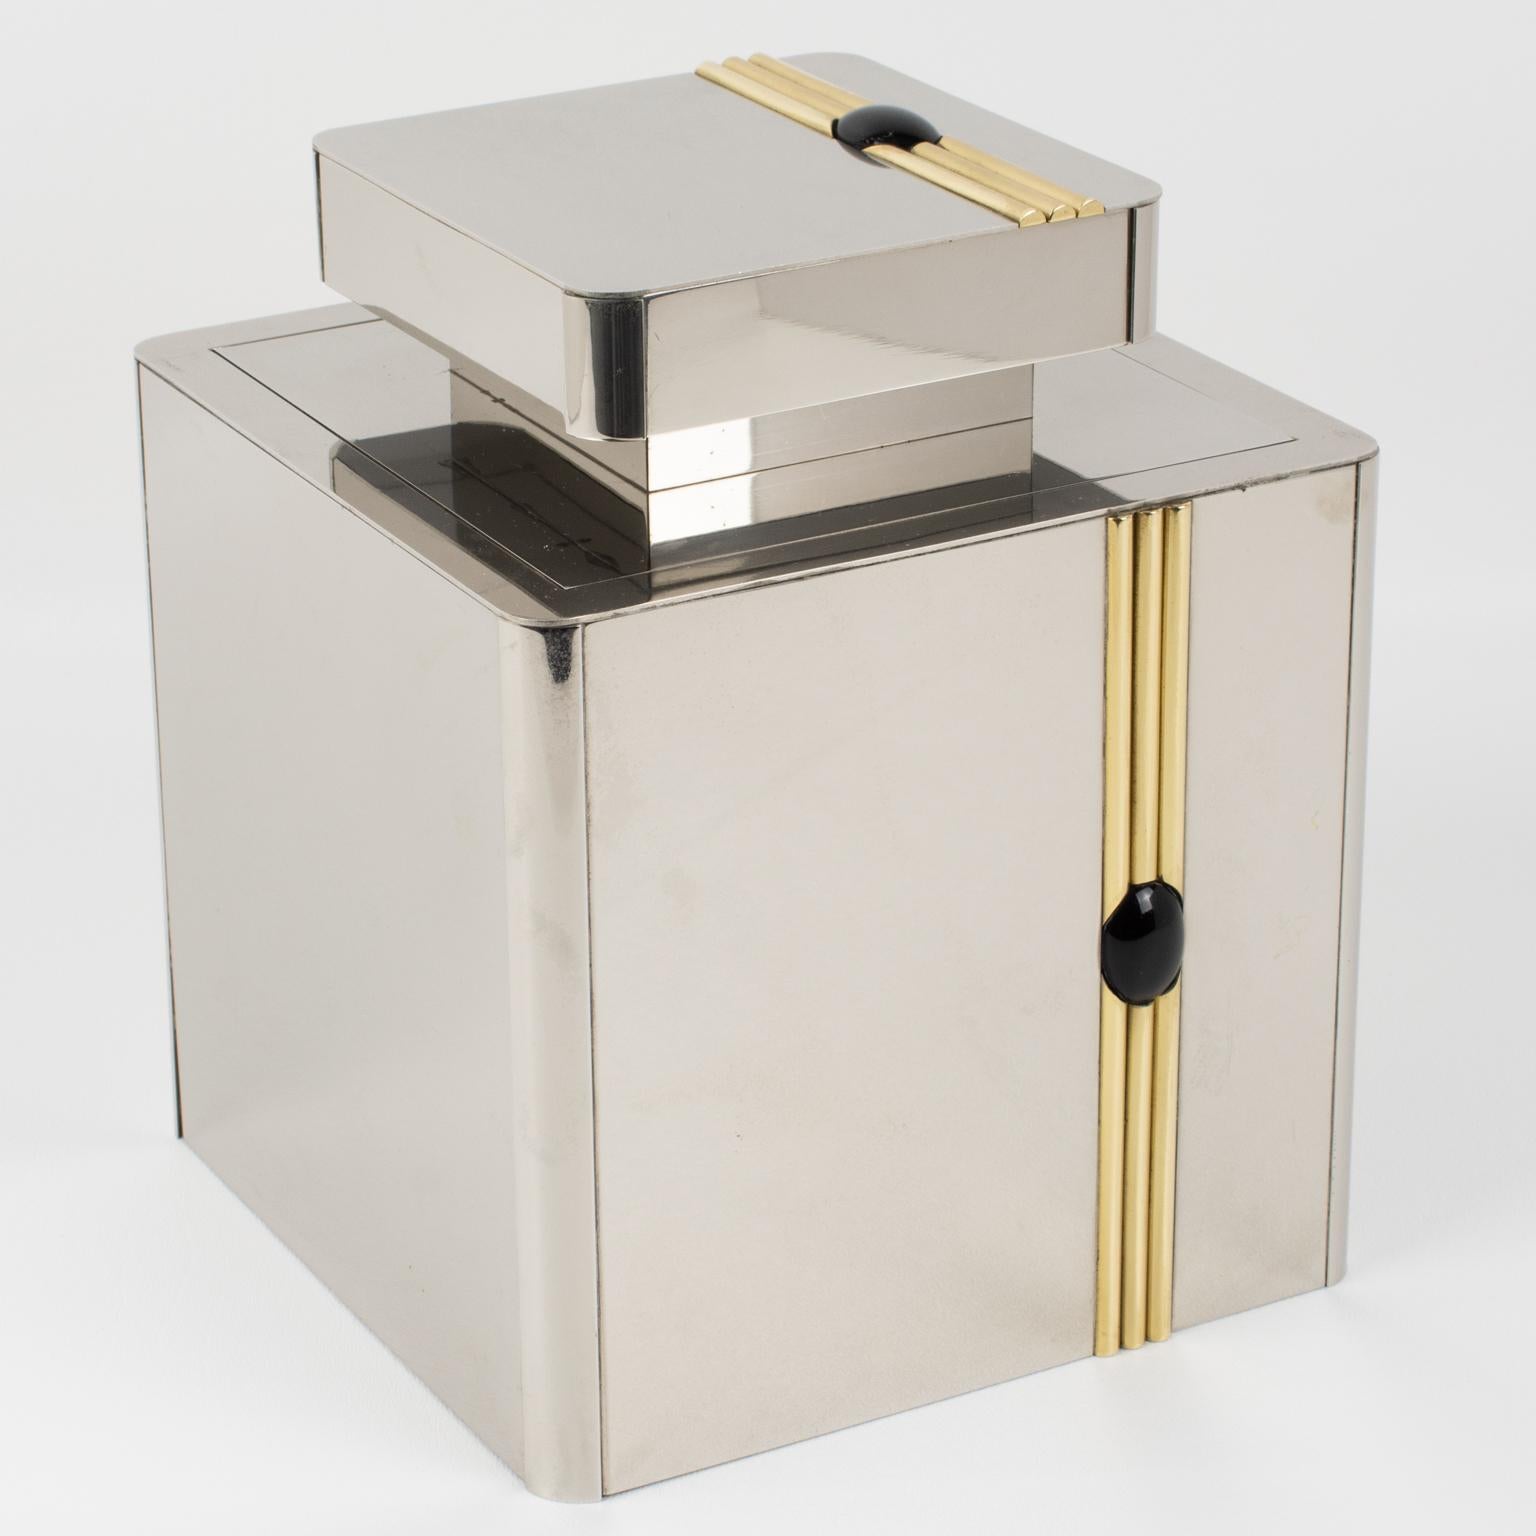 This is a sophisticated barware ice bucket for a bar or cocktail party whose design is attributed to Romeo Rega, Italy, circa 1970. The entertainment accessory features a geometric chrome metal framing ornate with gilded brass striped decor pattern